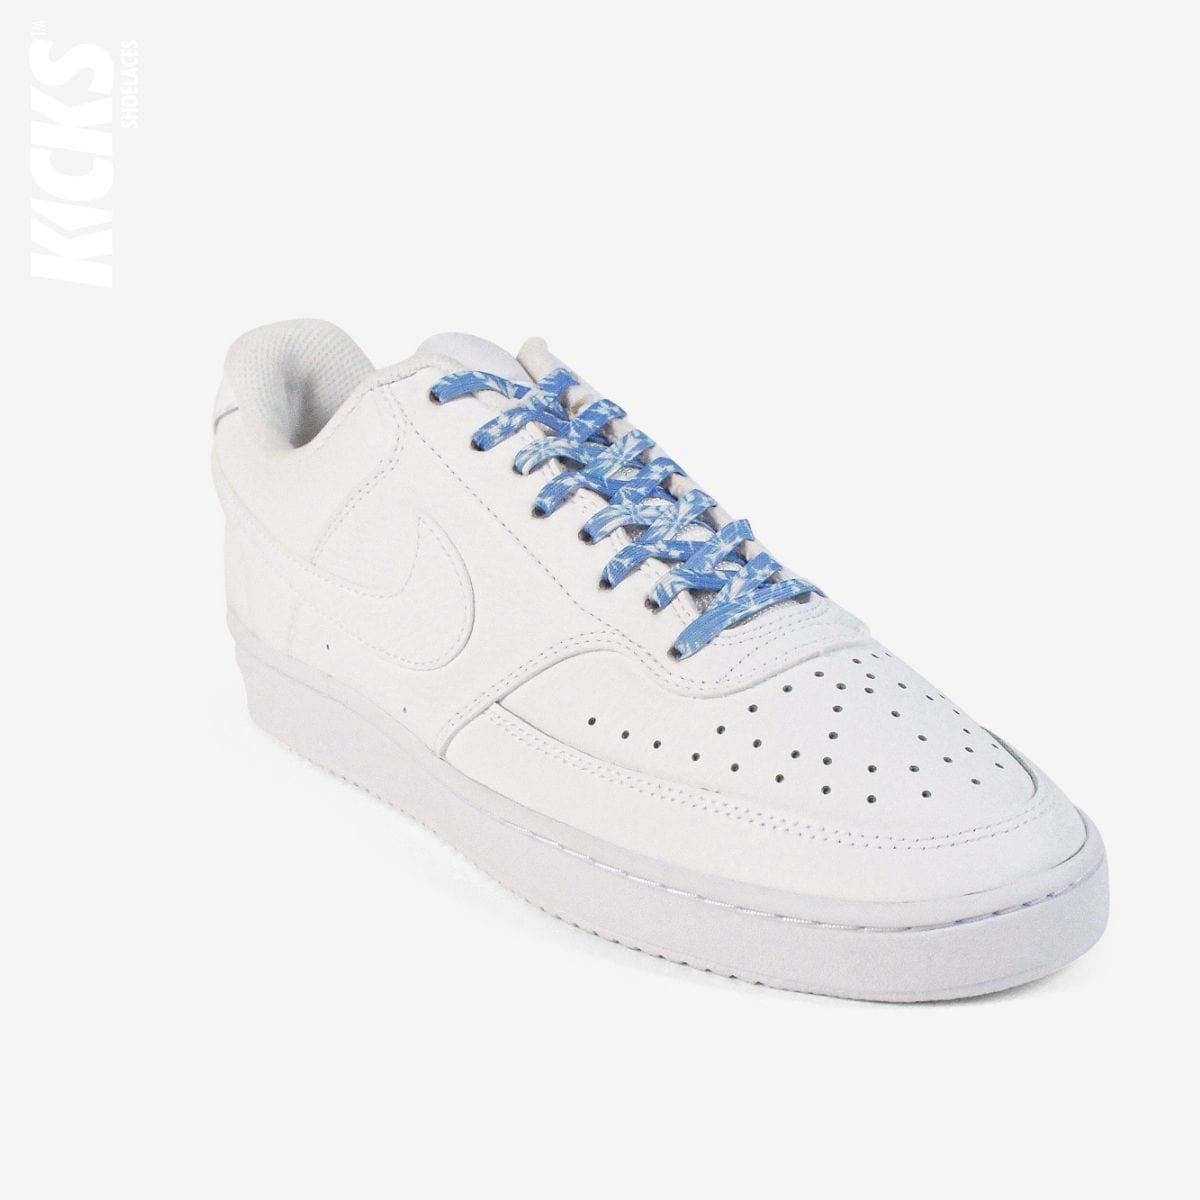 elastic-no-tie-shoelaces-with-snowflake-lace-on-nike-white-sneakers